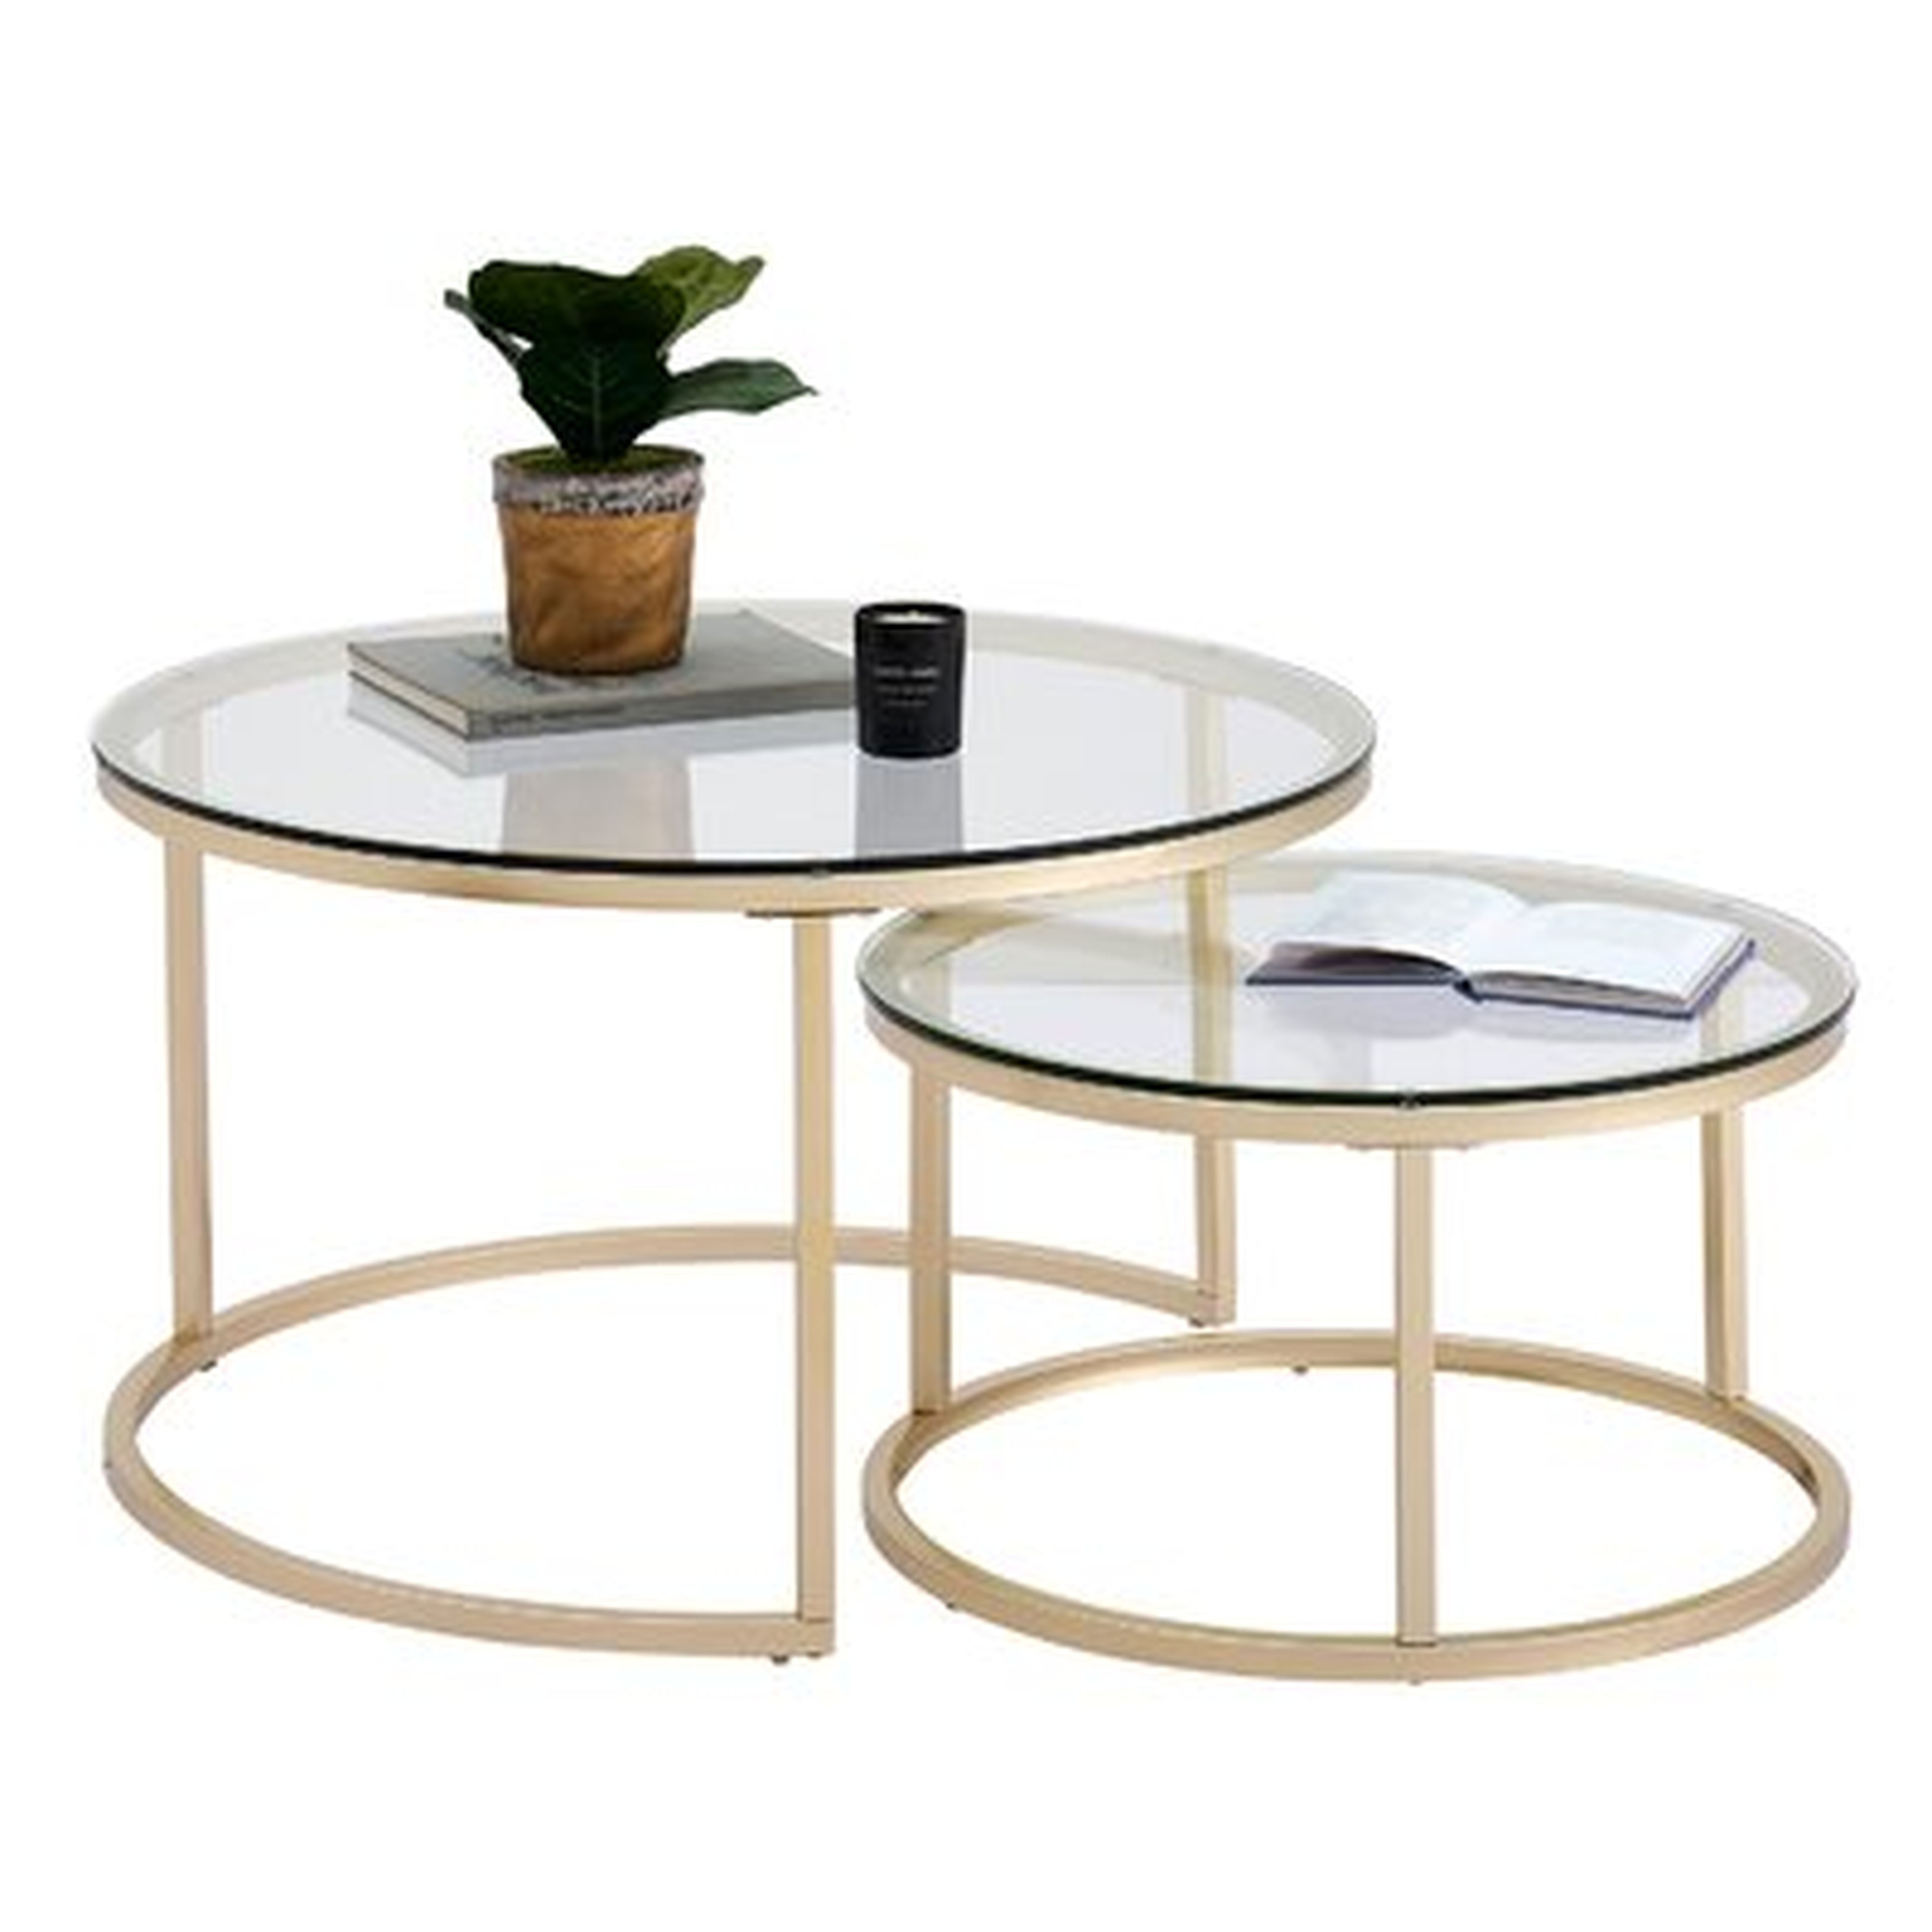 Coffee Table Nesting Table Round Modern Accent Cocktail Table For Living Room Table Set Of 2 31.5’’ + 23.6’’ - Wayfair